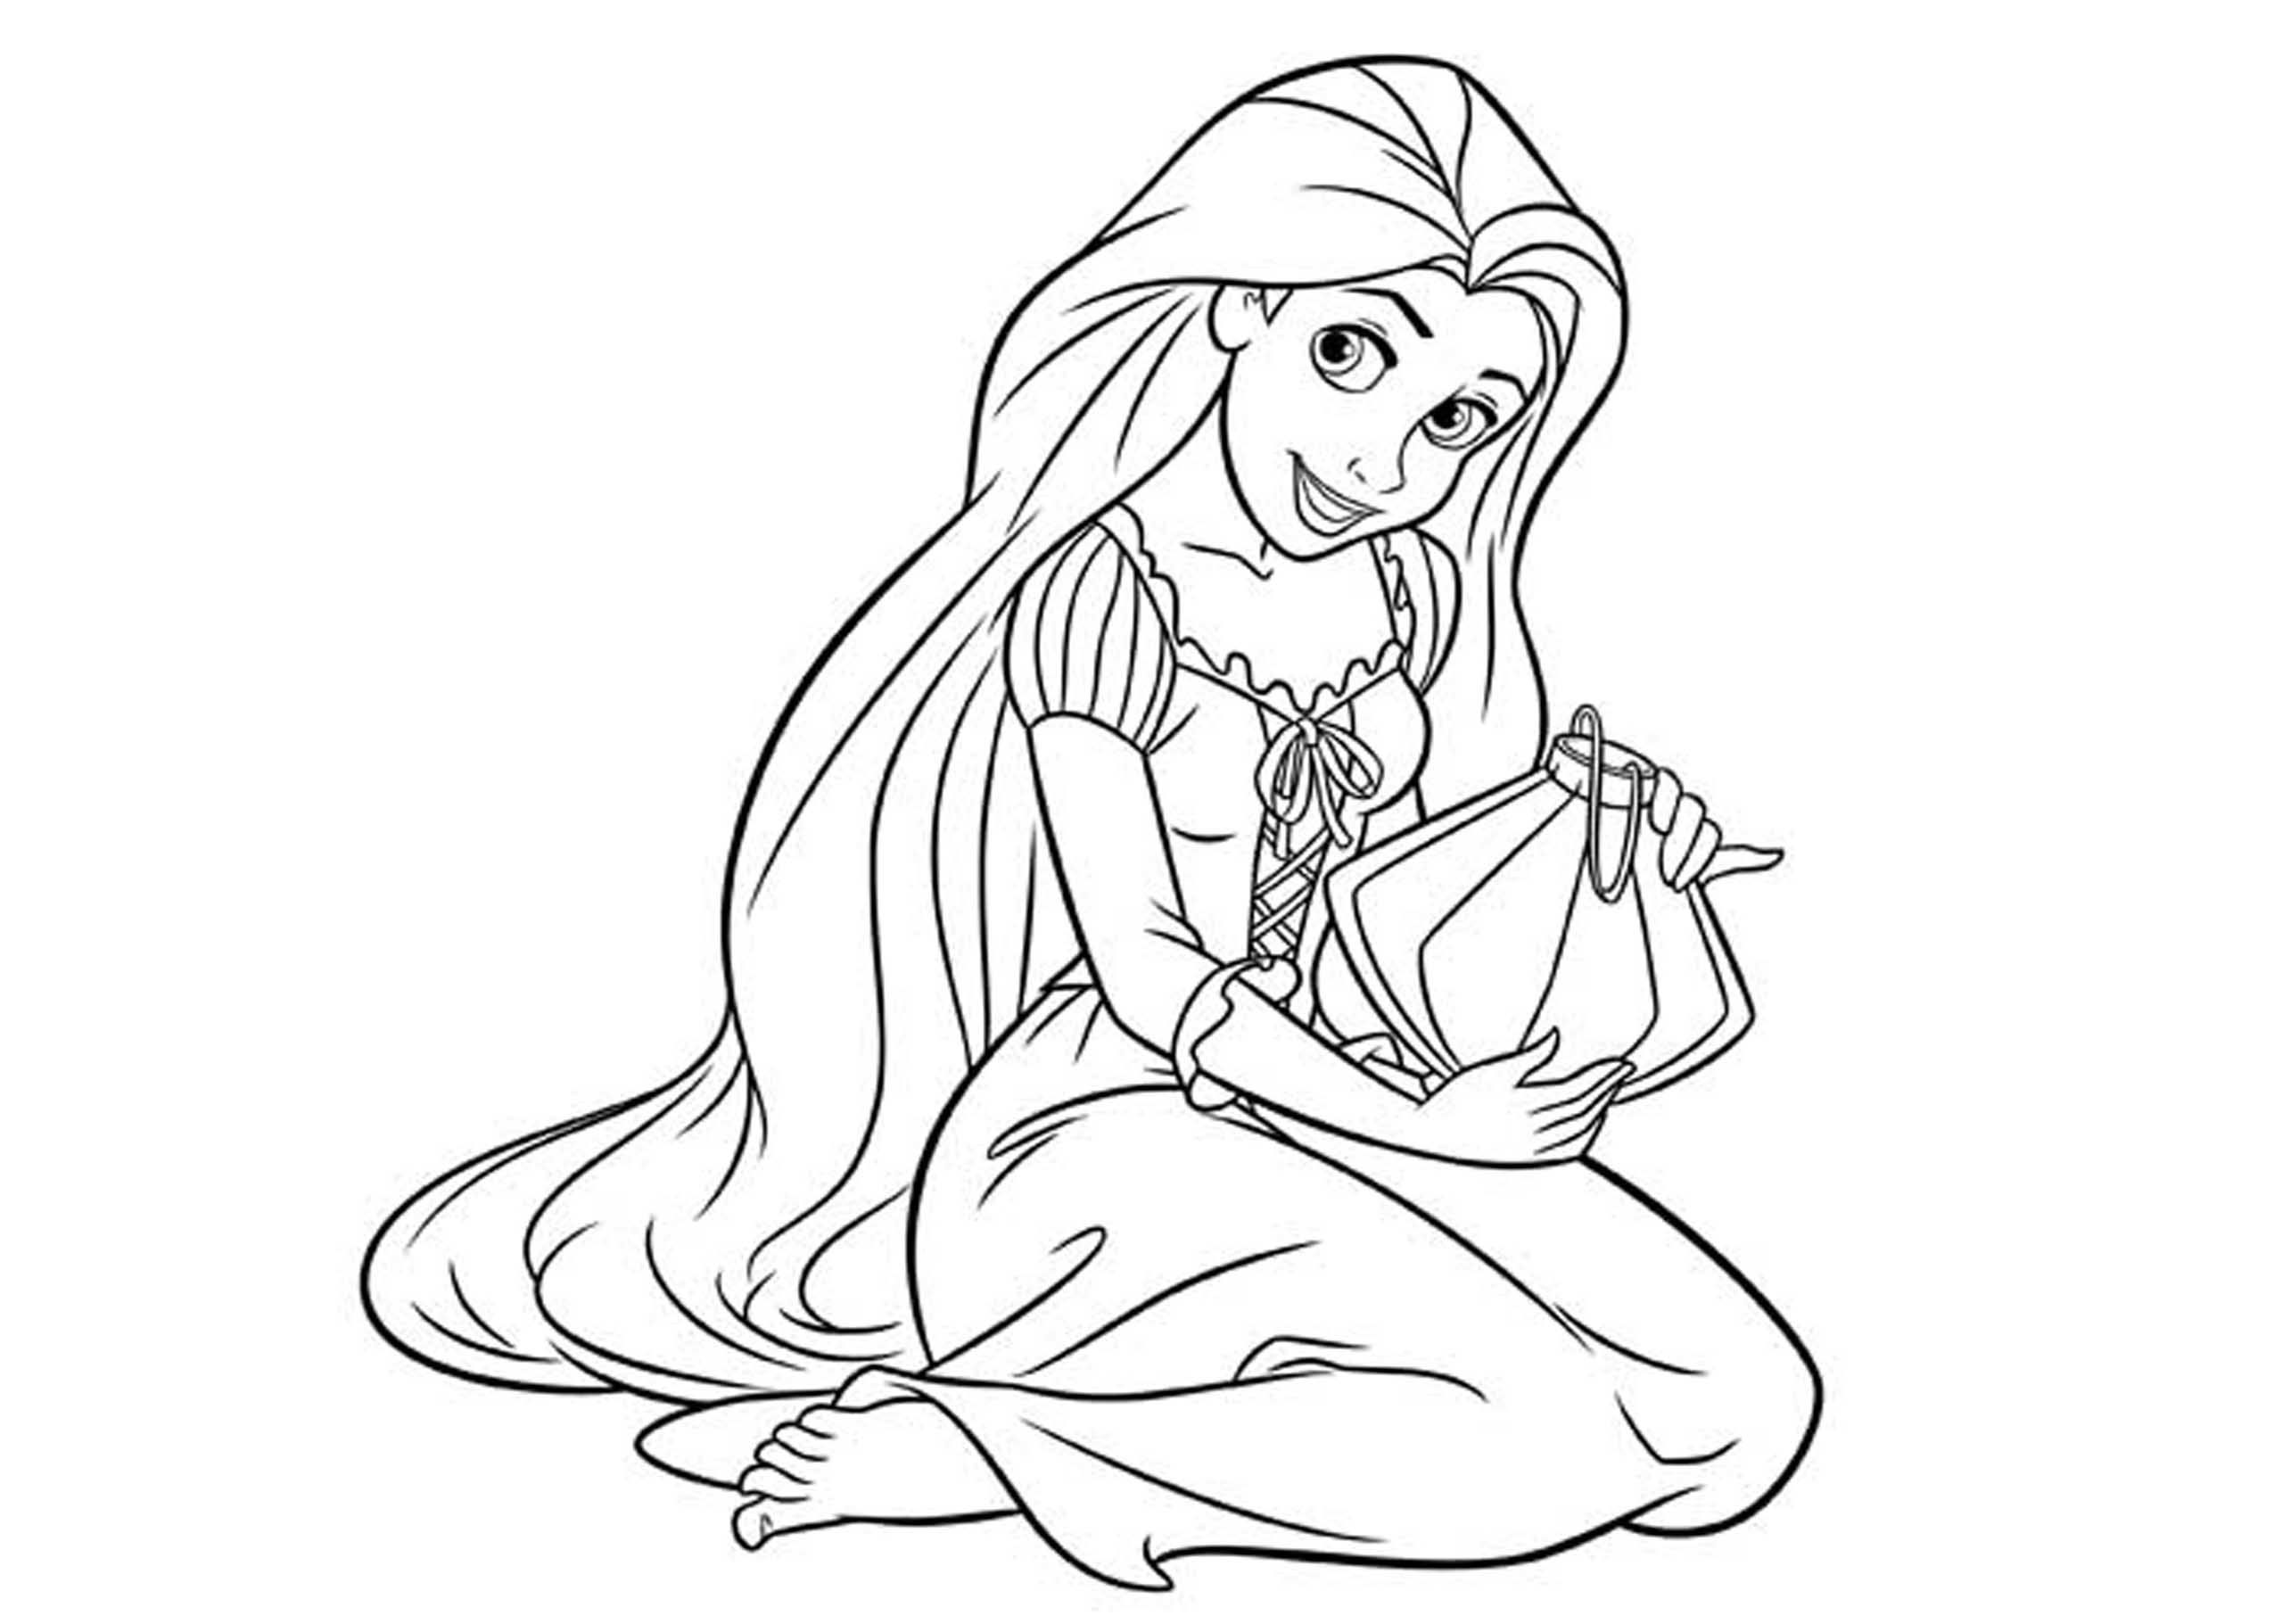 Disney Princess Coloring Pages Free To Print   Coloring Home